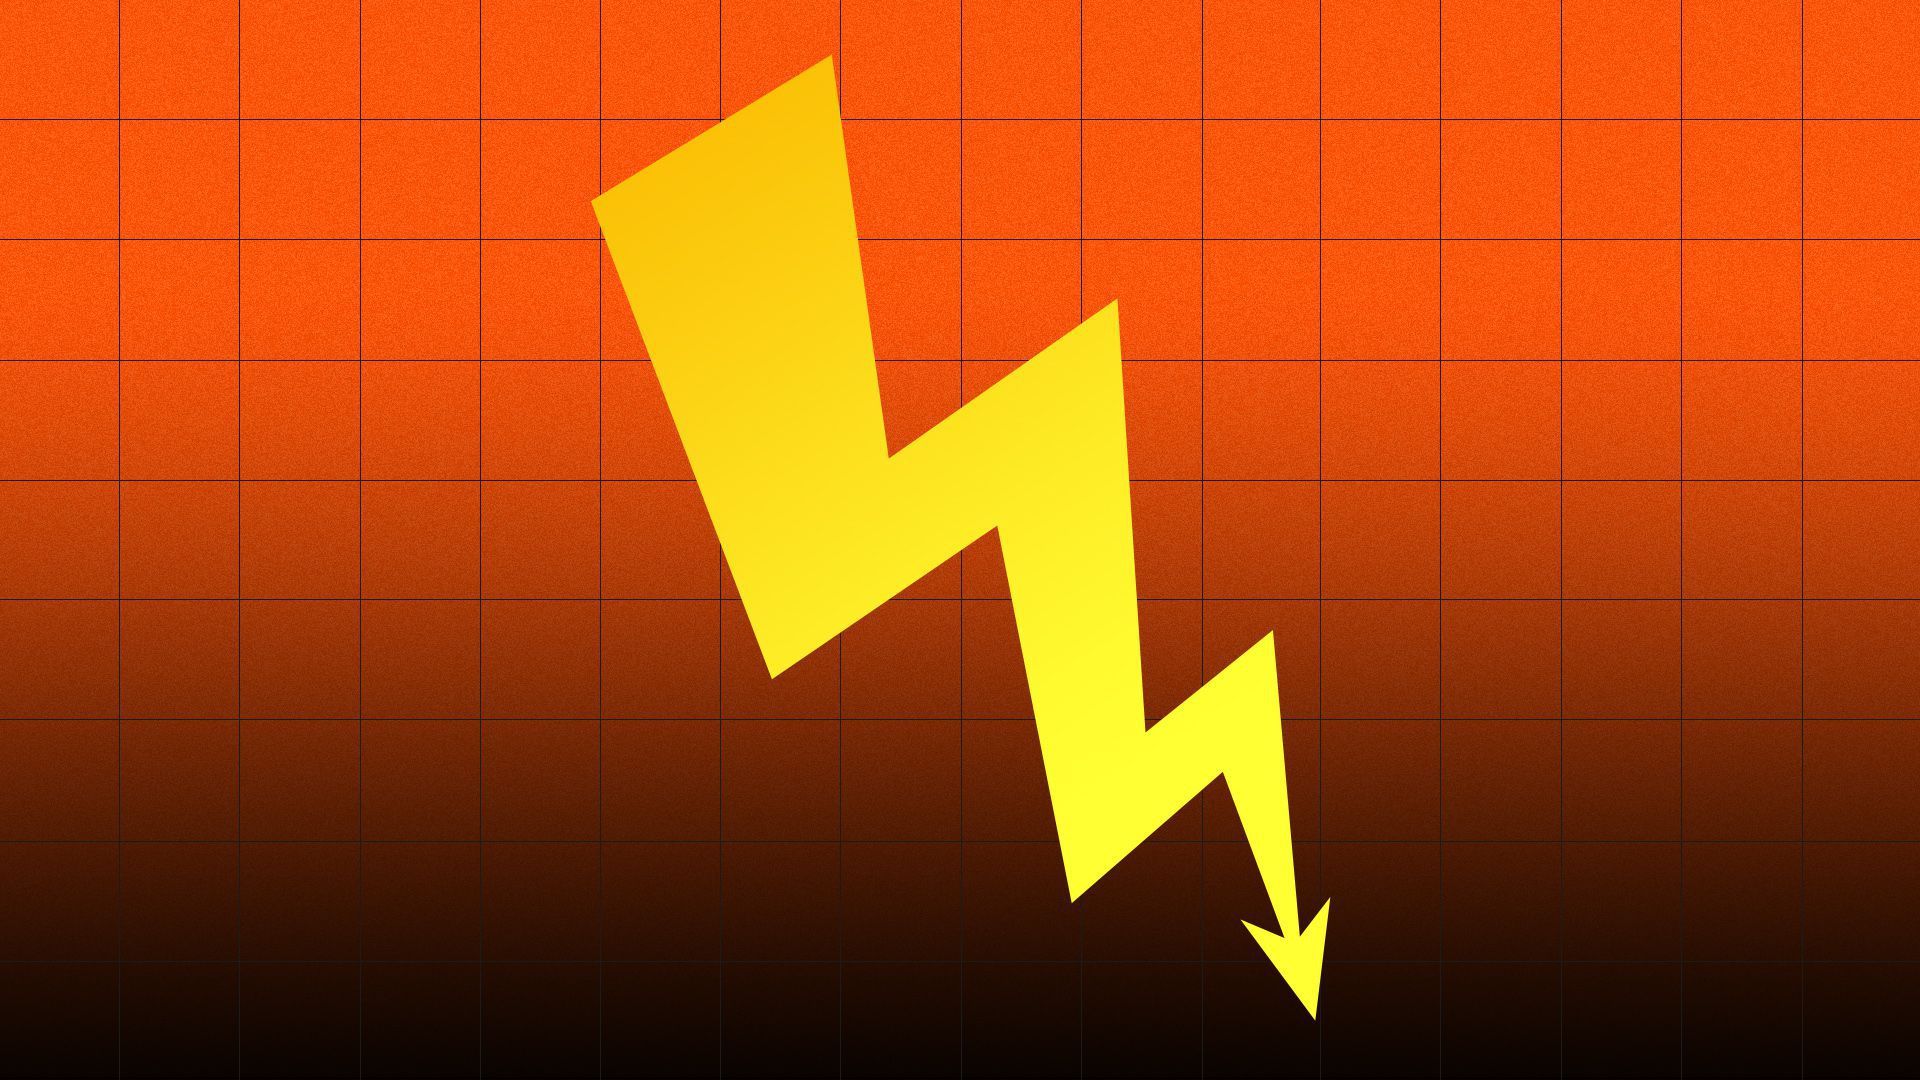 Illustration of yellow lightning bolt as an arrow pointed down.